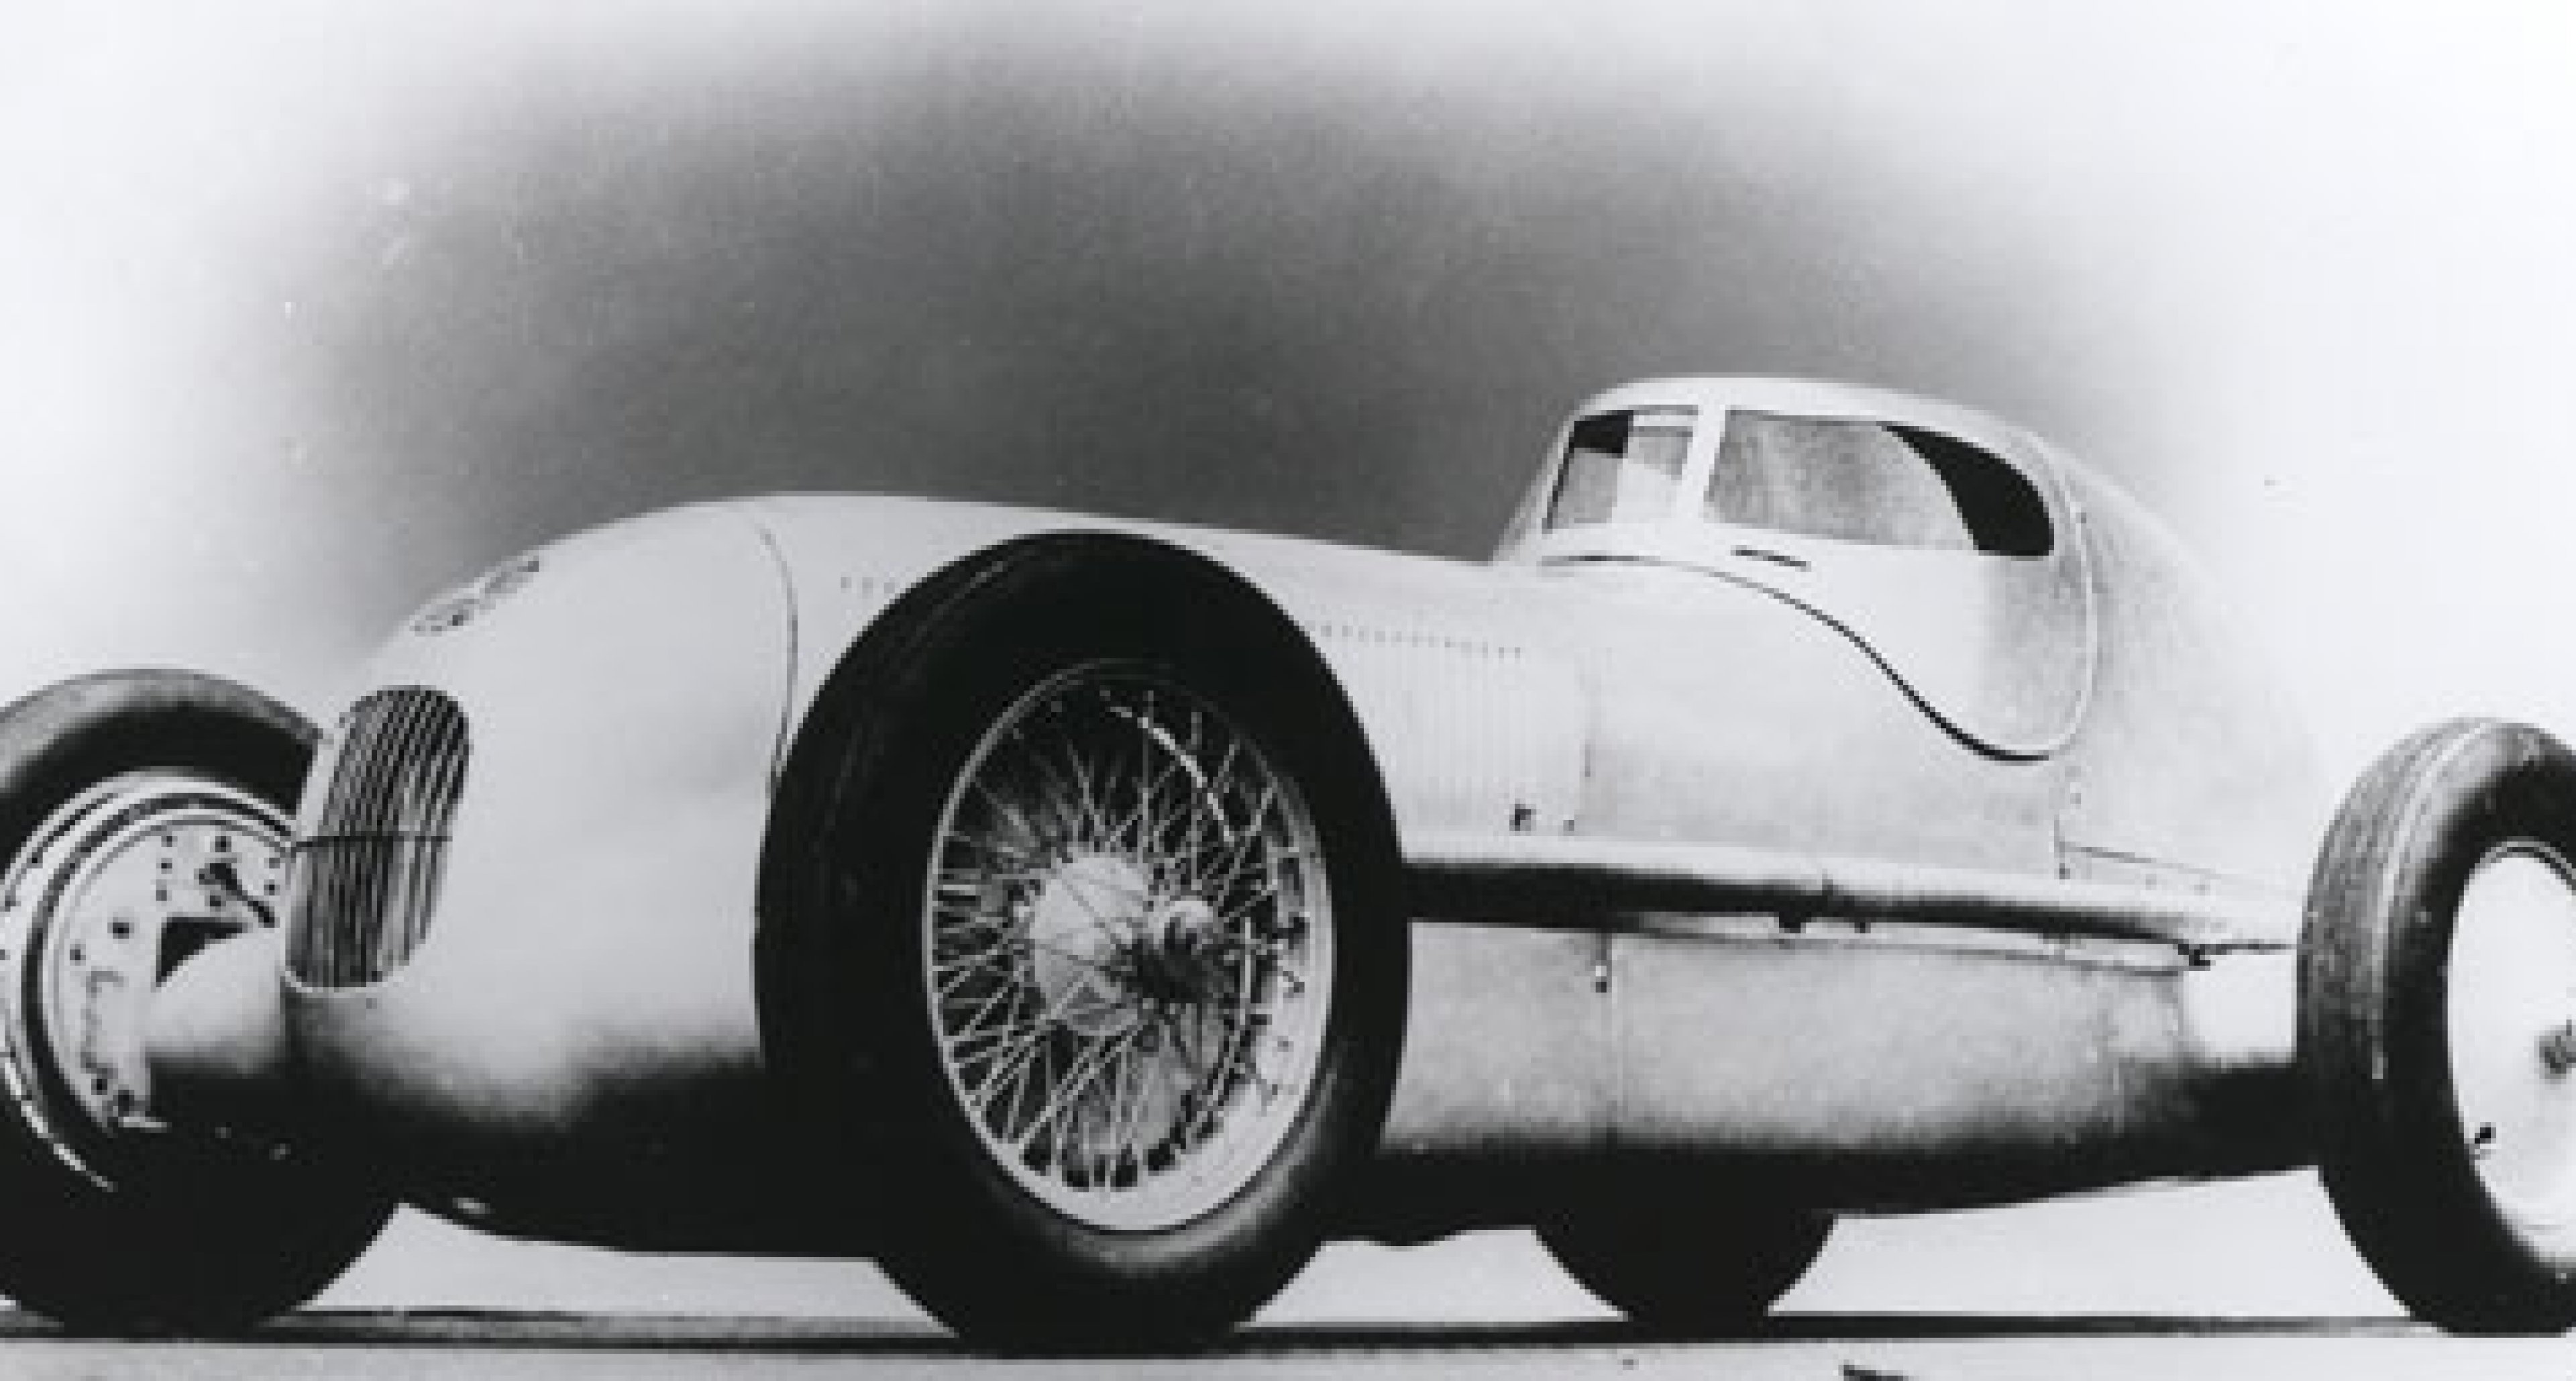 Mercedes speed record cars of the 1930s